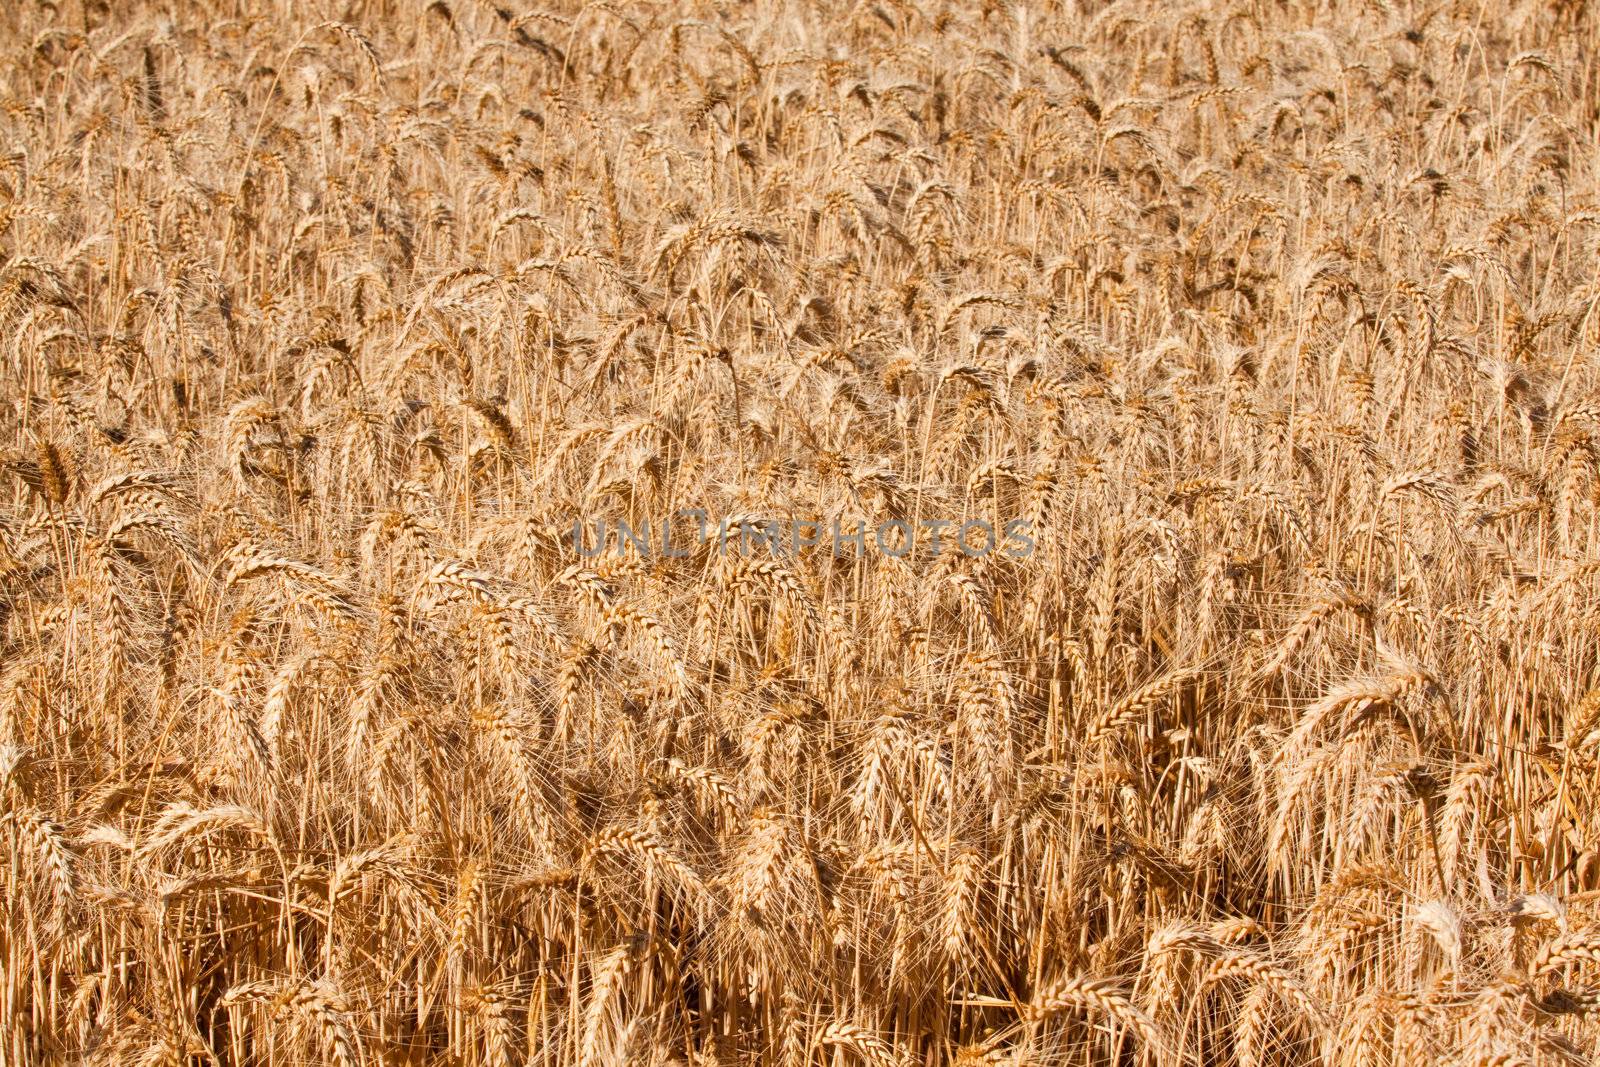 Abstract Wheat by joshuaraineyphotography